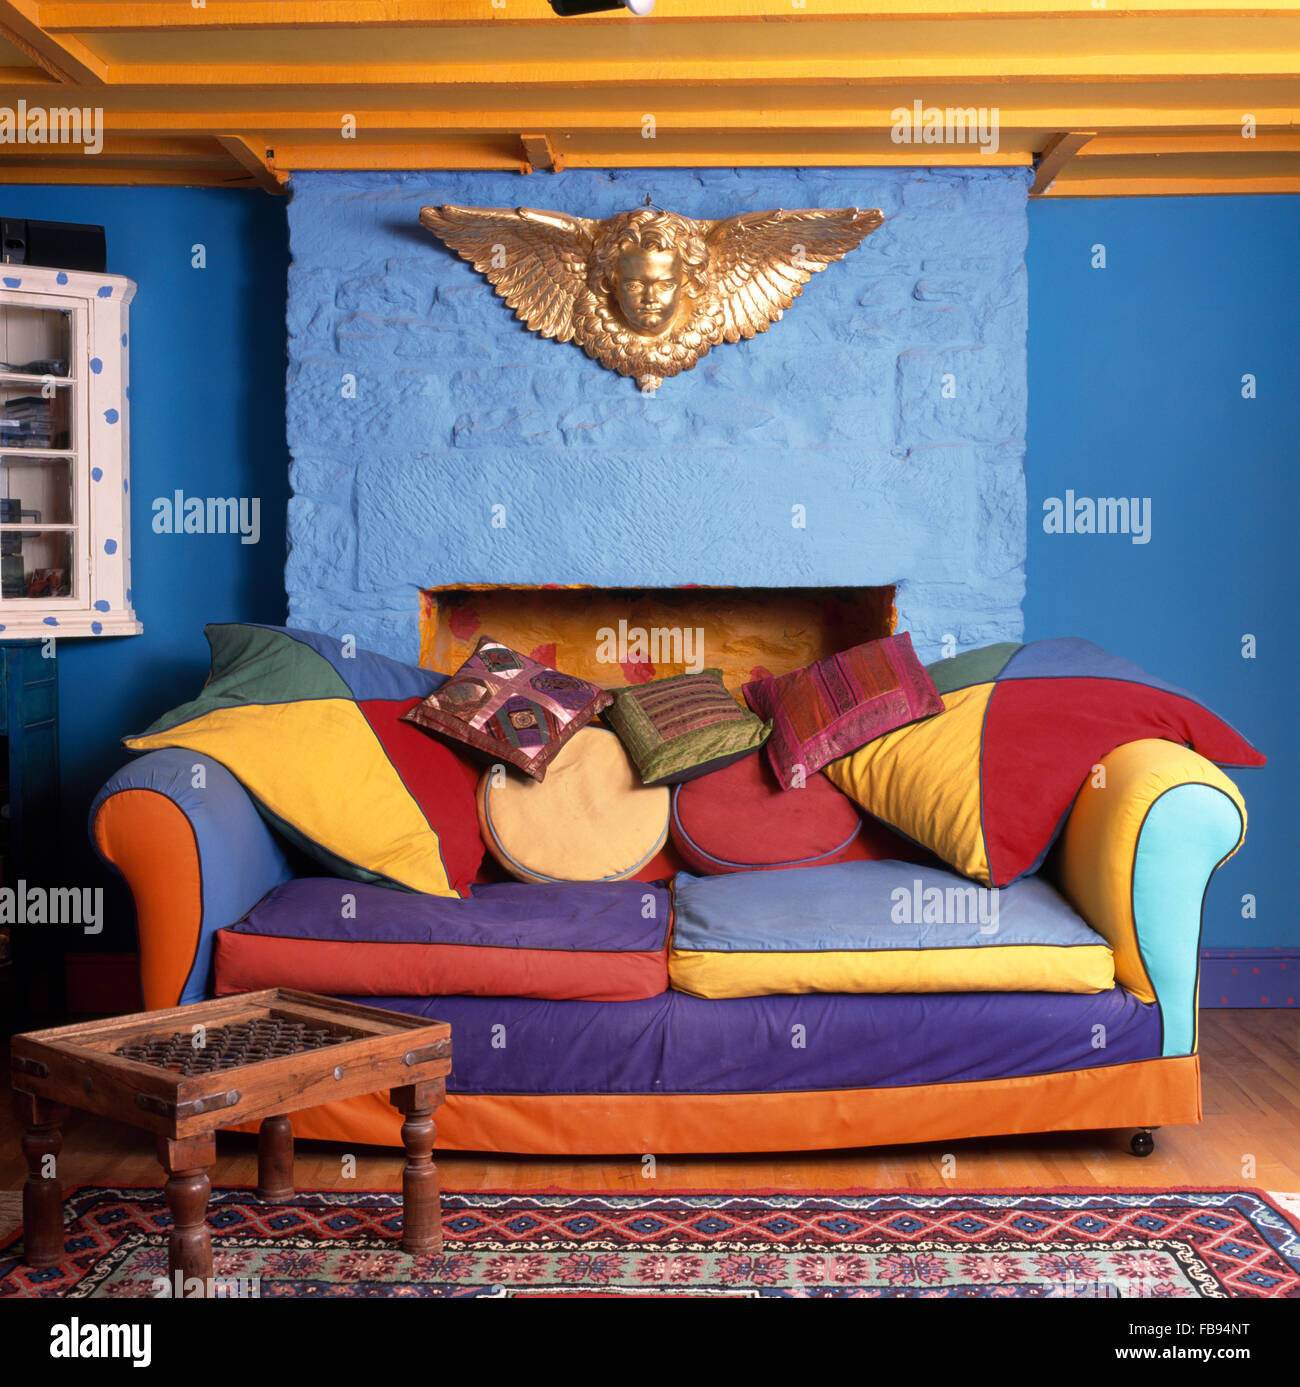 Gold cherub above a vibrant, multi colored sofa in a bright blue nineties cottage living room Stock Photo